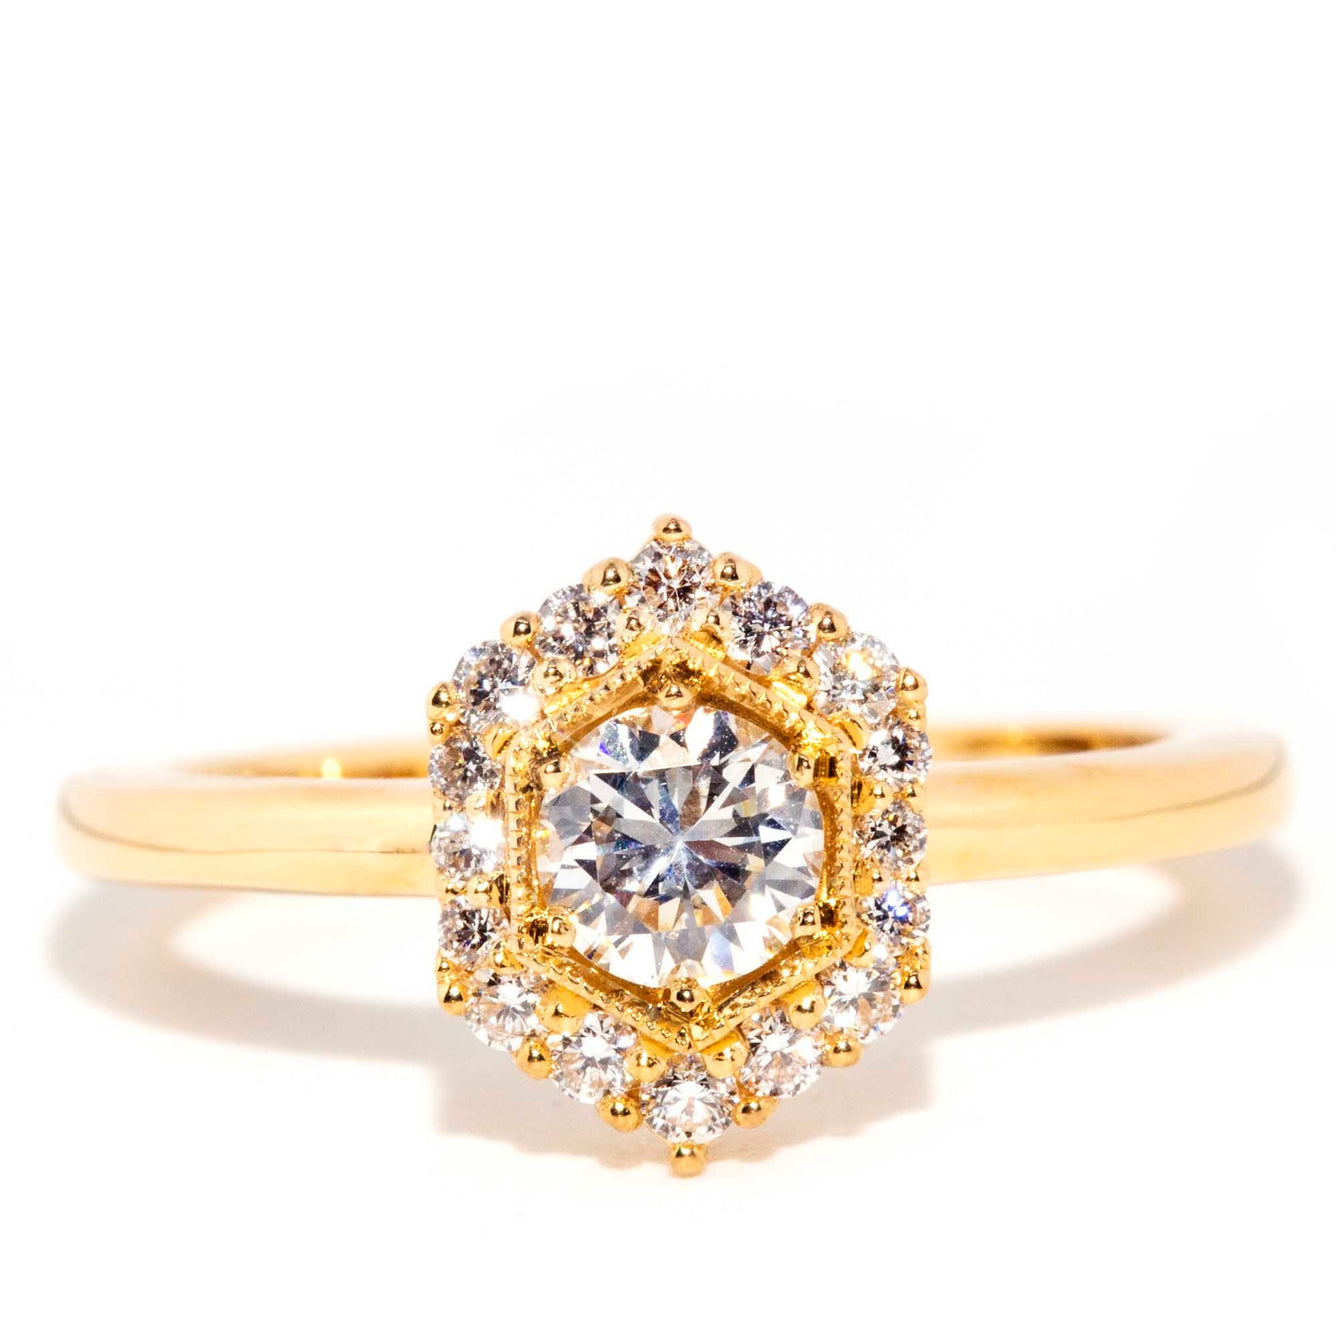 QUINN Contemporary 18ct Yellow Gold Diamond Hexagonal Halo Ring* OB Gemmo Rings Imperial Jewellery Imperial Jewellery - Hamilton 